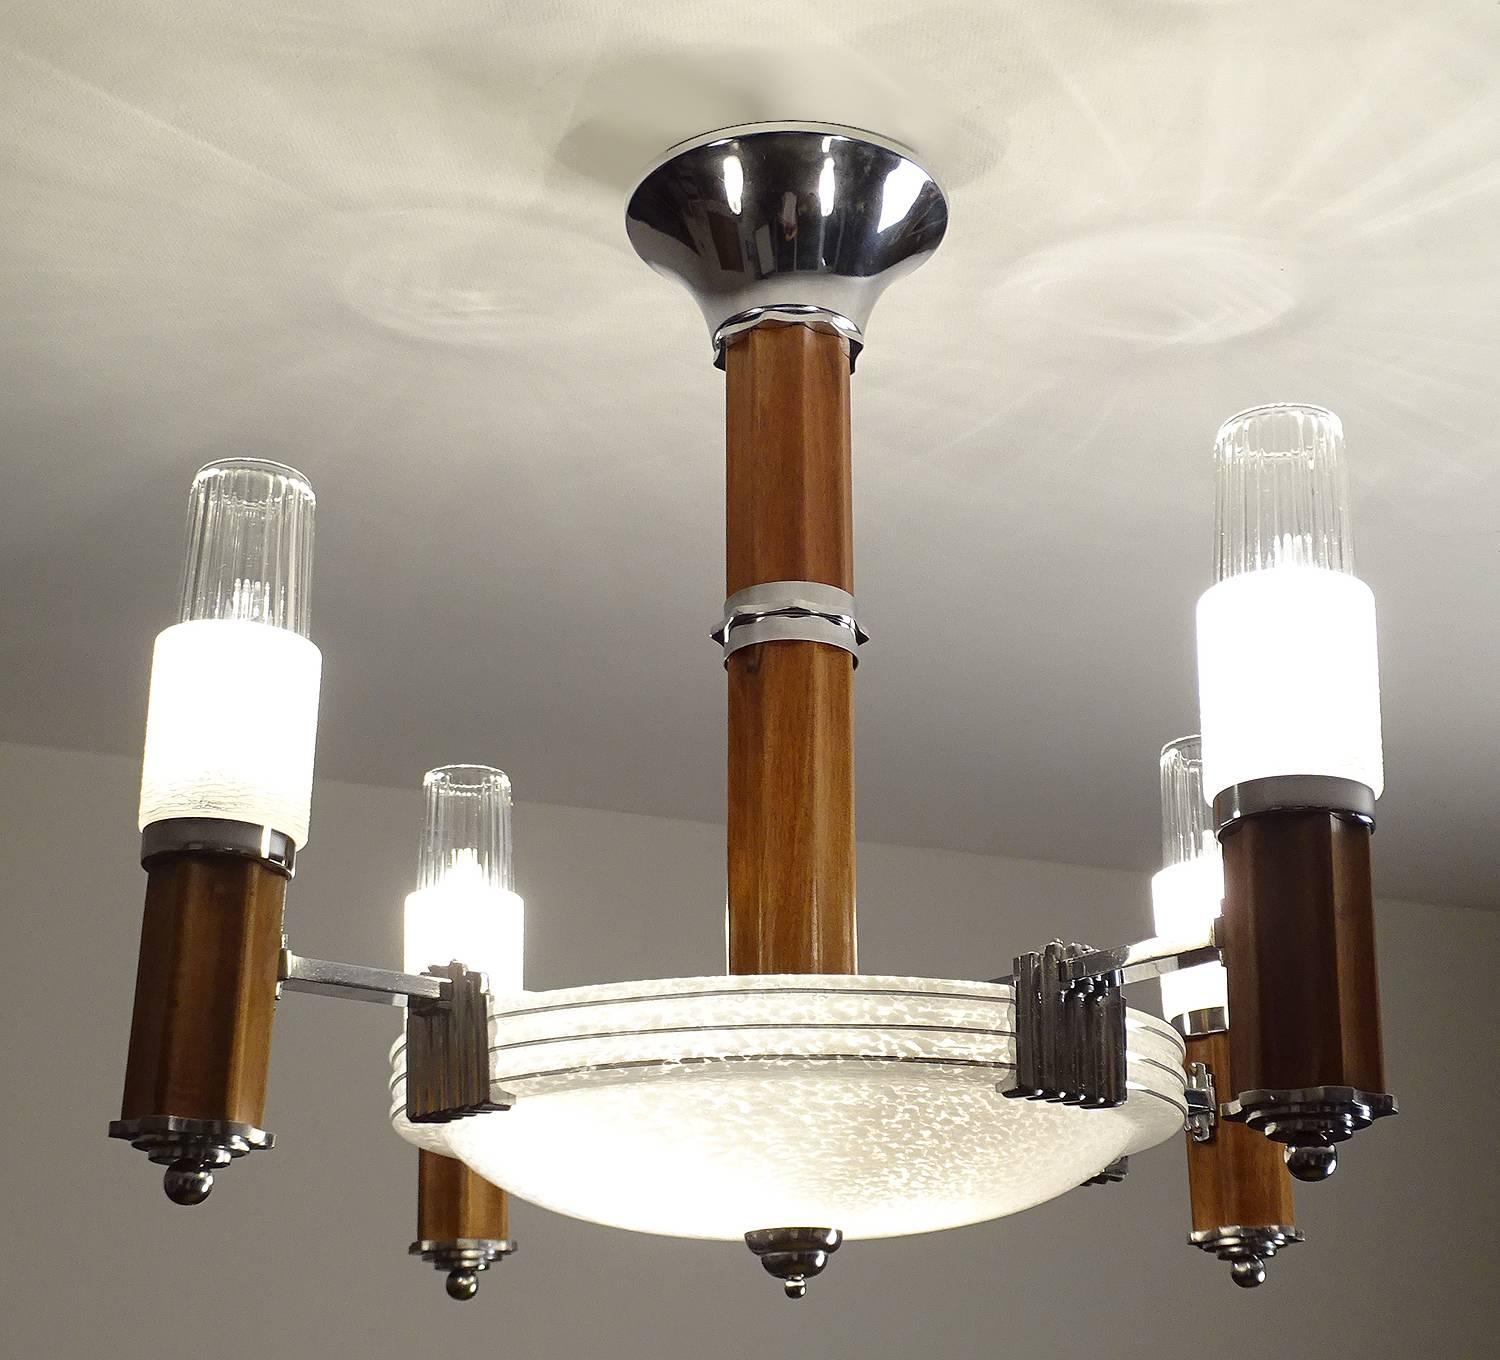 Spectacular large French Art Deco chandelier, circa 1935-1945, featuring a large glass shade with triple chrome banding highlight, flanked by four towers in skyscraper design in wood, chrome and glass (clear and opaque)
22.64 in.H / 57.5